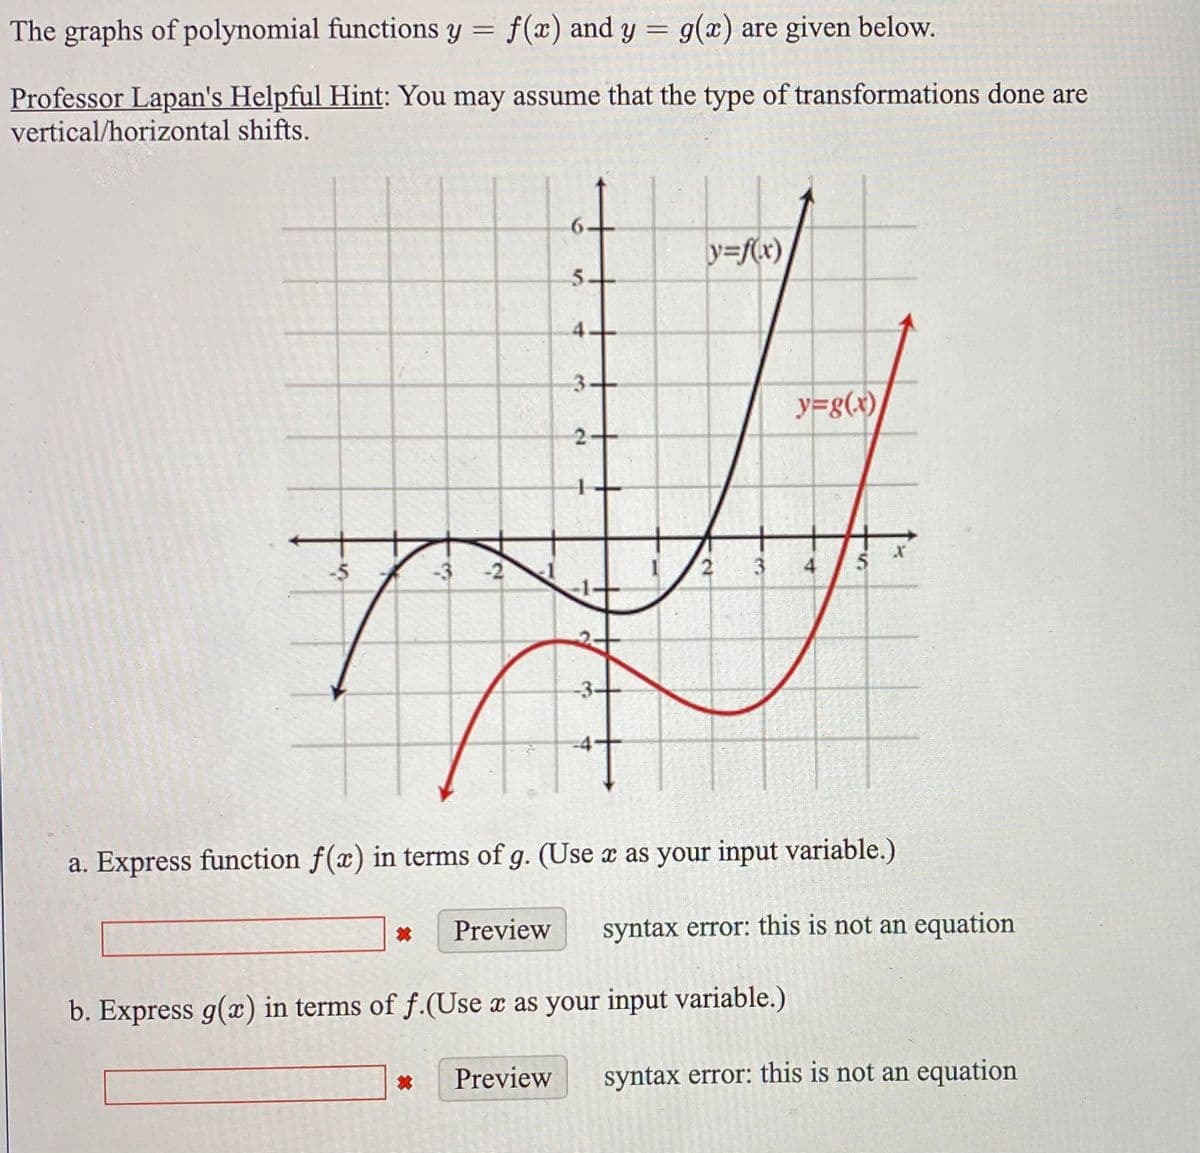 The graphs of polynomial functions y = f(x) and y = g(x) are given below.
%3D
Professor Lapan's Helpful Hint: You may assume that the type of transformations done are
vertical/horizontal shifts.
y=f(x)
5.
4.
3+
y=g(x)
2-
-3 -2
4
-3-
a. Express function f(x) in terms of g. (Use x as your input variable.)
Preview
syntax error: this is not an equation
b. Express g(x) in terms of f.(Use x as your input variable.)
Preview
syntax error: this is not an equation
寸
31
